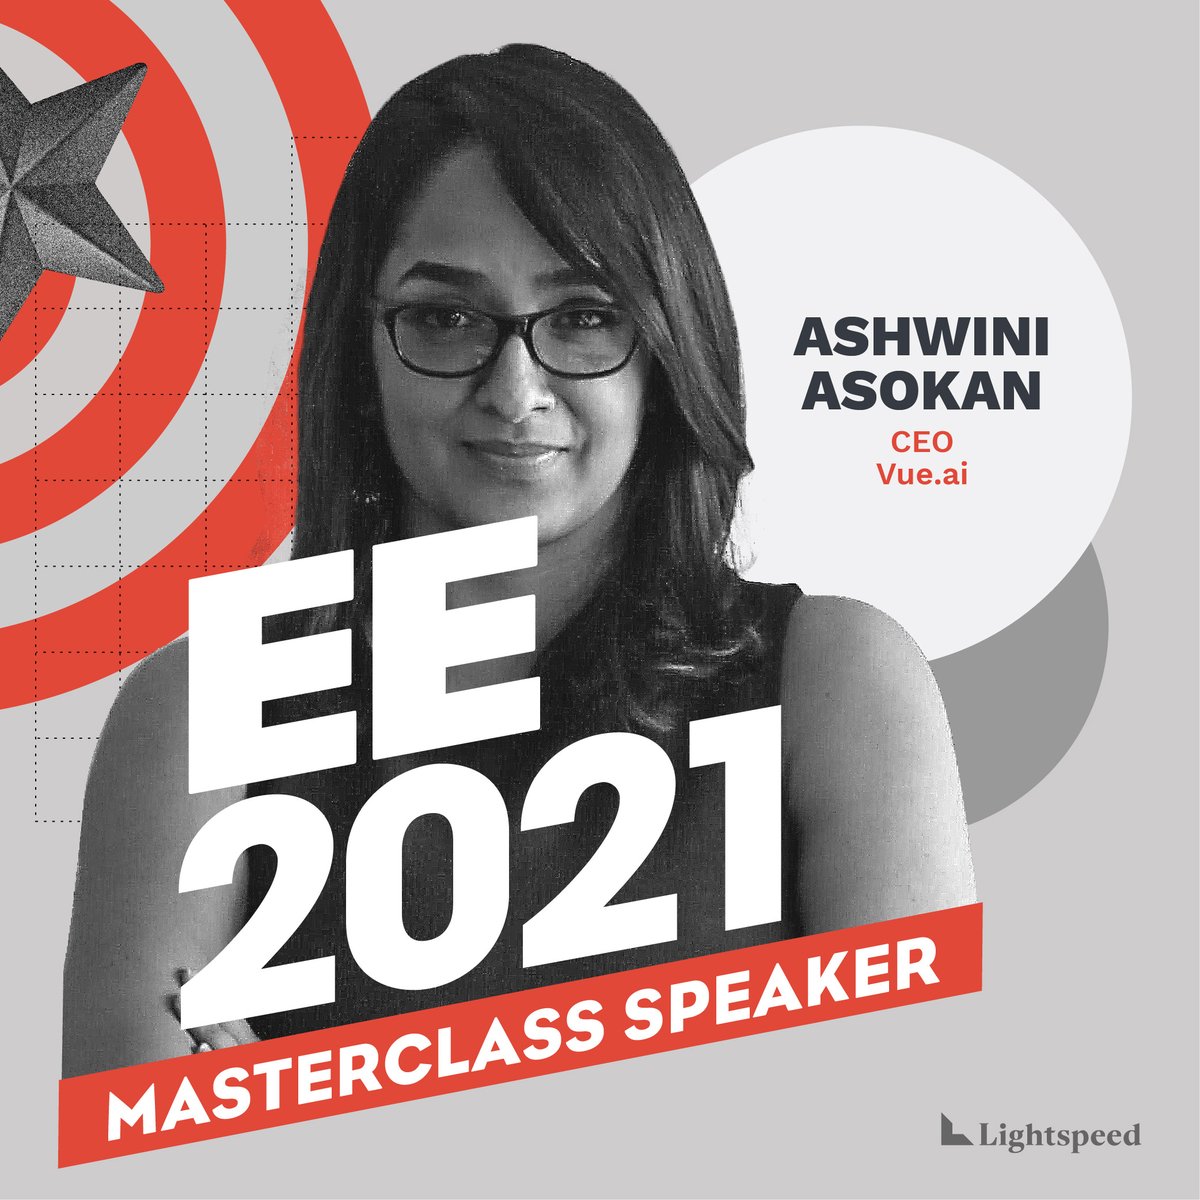 It was a pleasure to host  @LadyAshBorg, Co-Founder and CEO of  @Vue_ai, and one of the most battle-hardened founders in the ecosystem anywhere in the world. For her  #EE21 masterclass, we spoke about building cutting edge businesses from India for the world. Some insights (1/9):